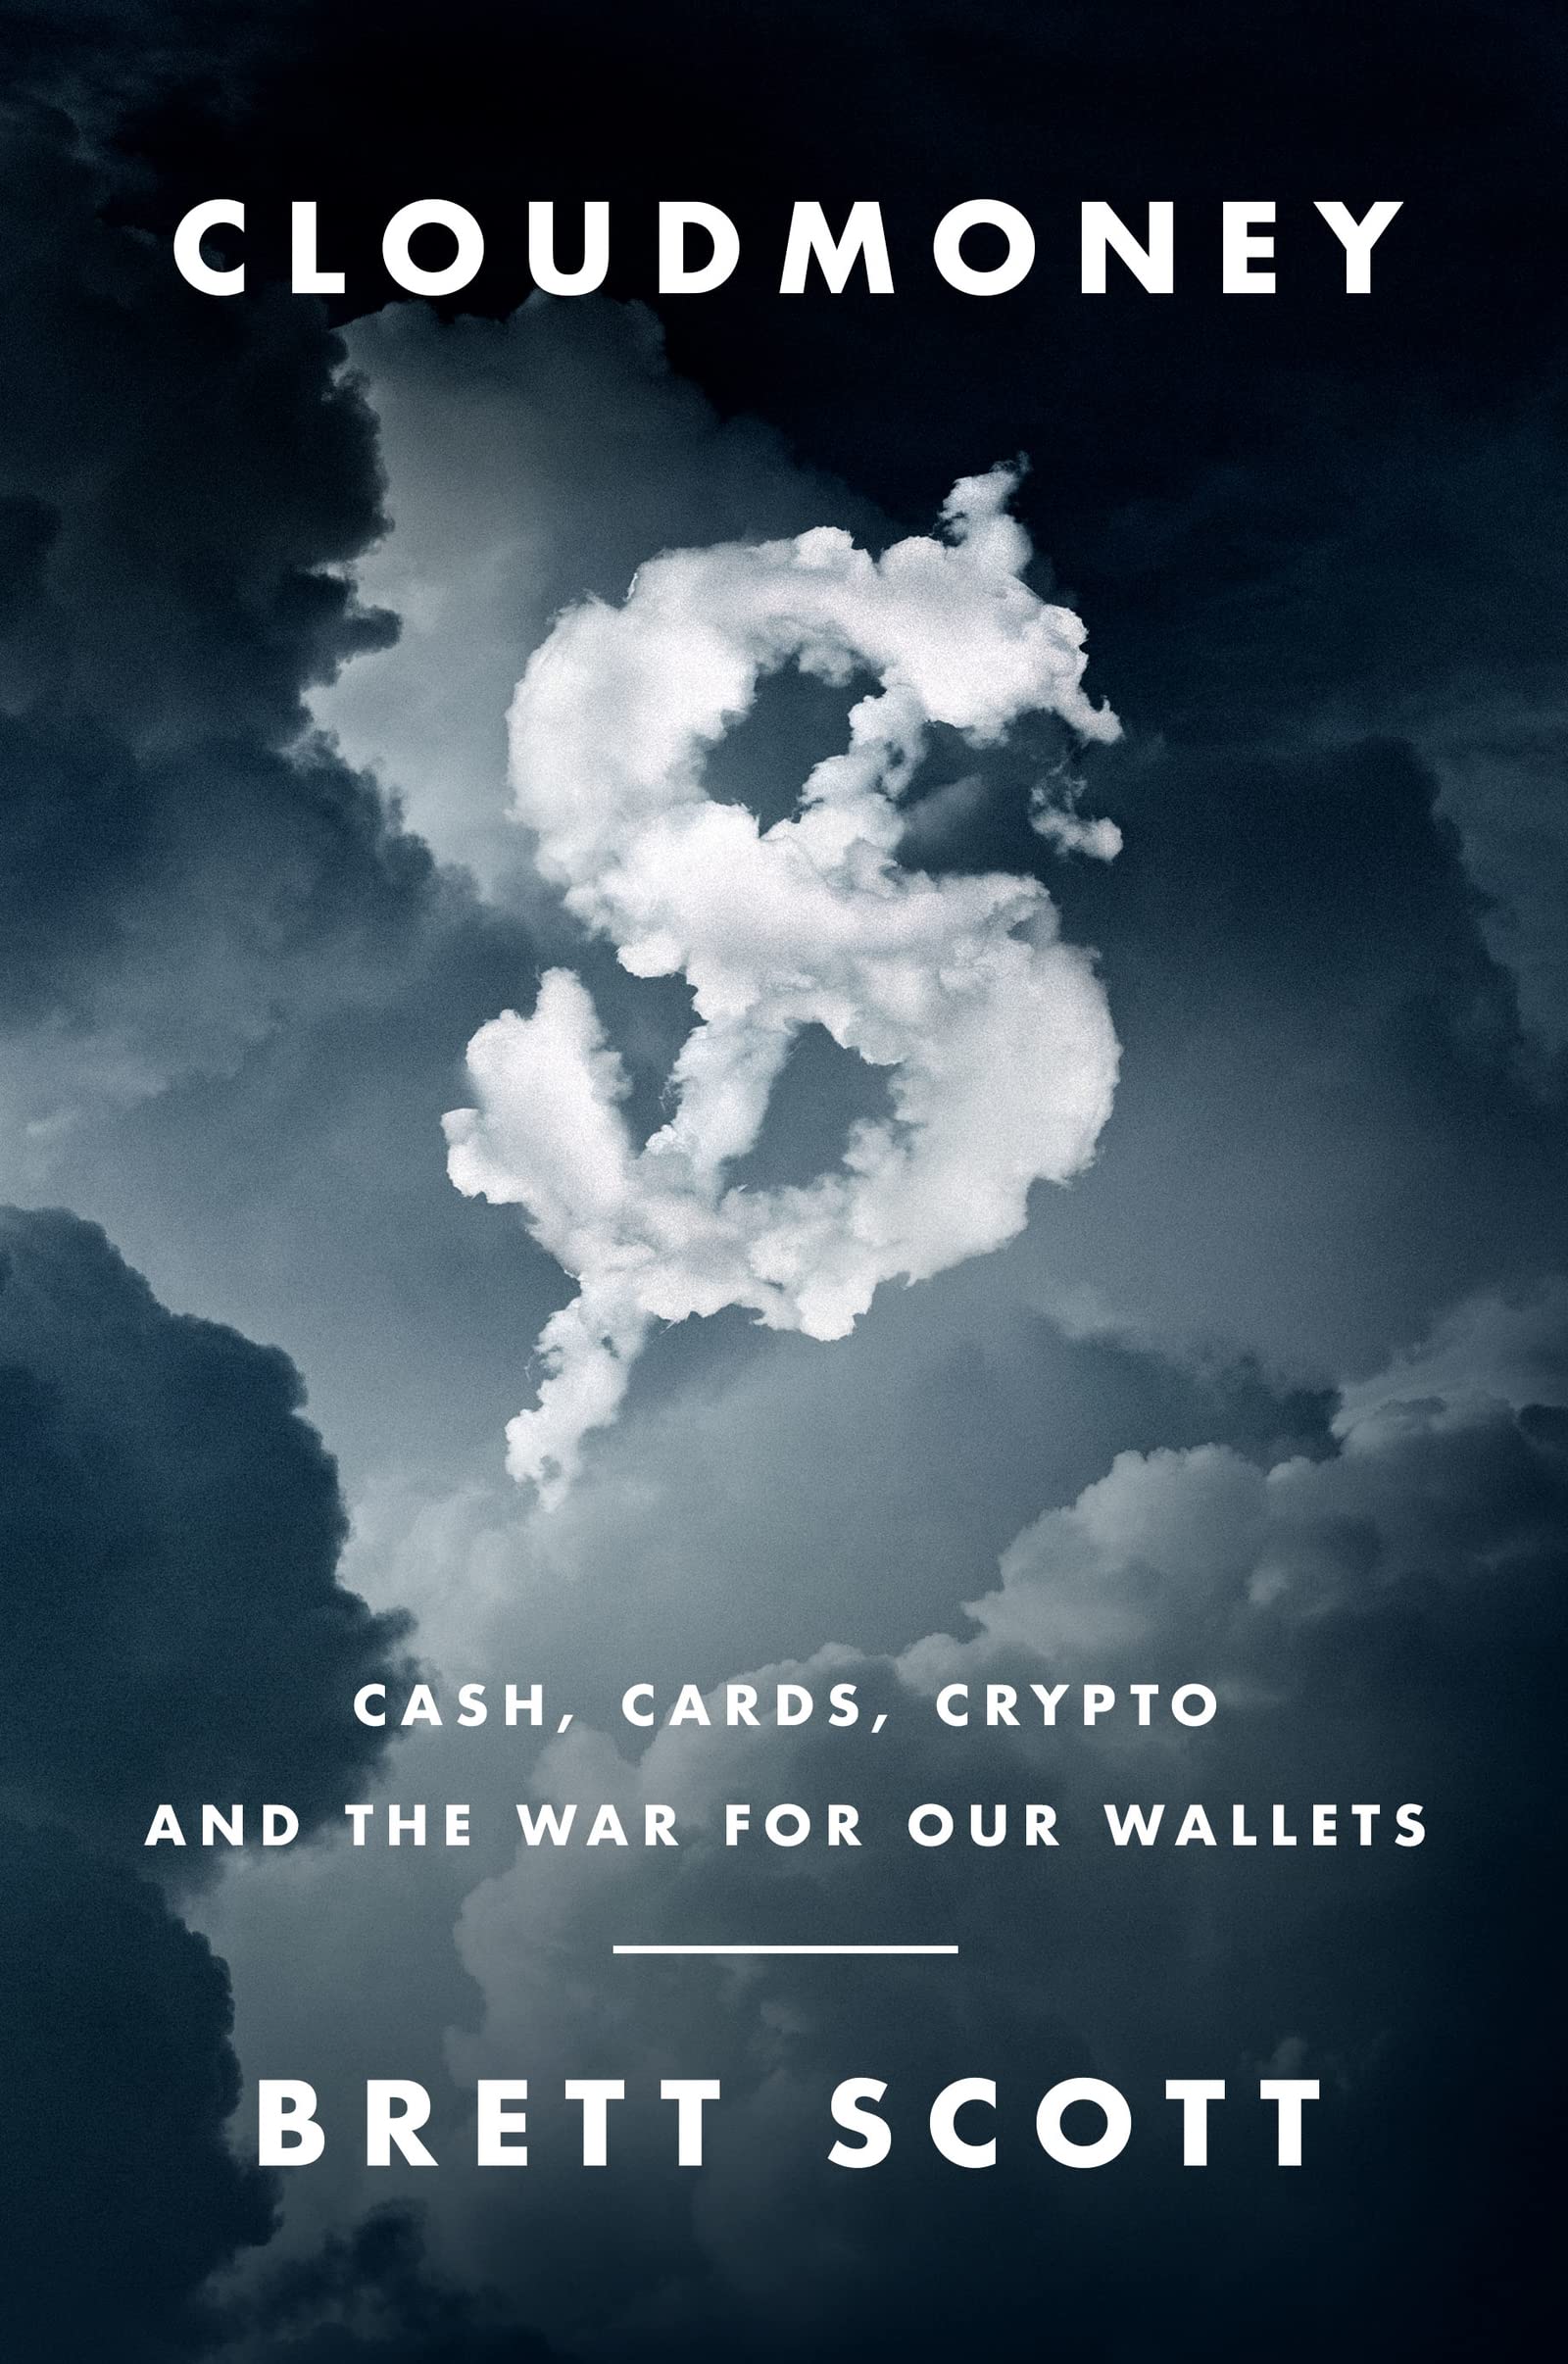 Cloudmoney: Cash, Cards, Crypto, and the War for Our Wallets (Hardcover)